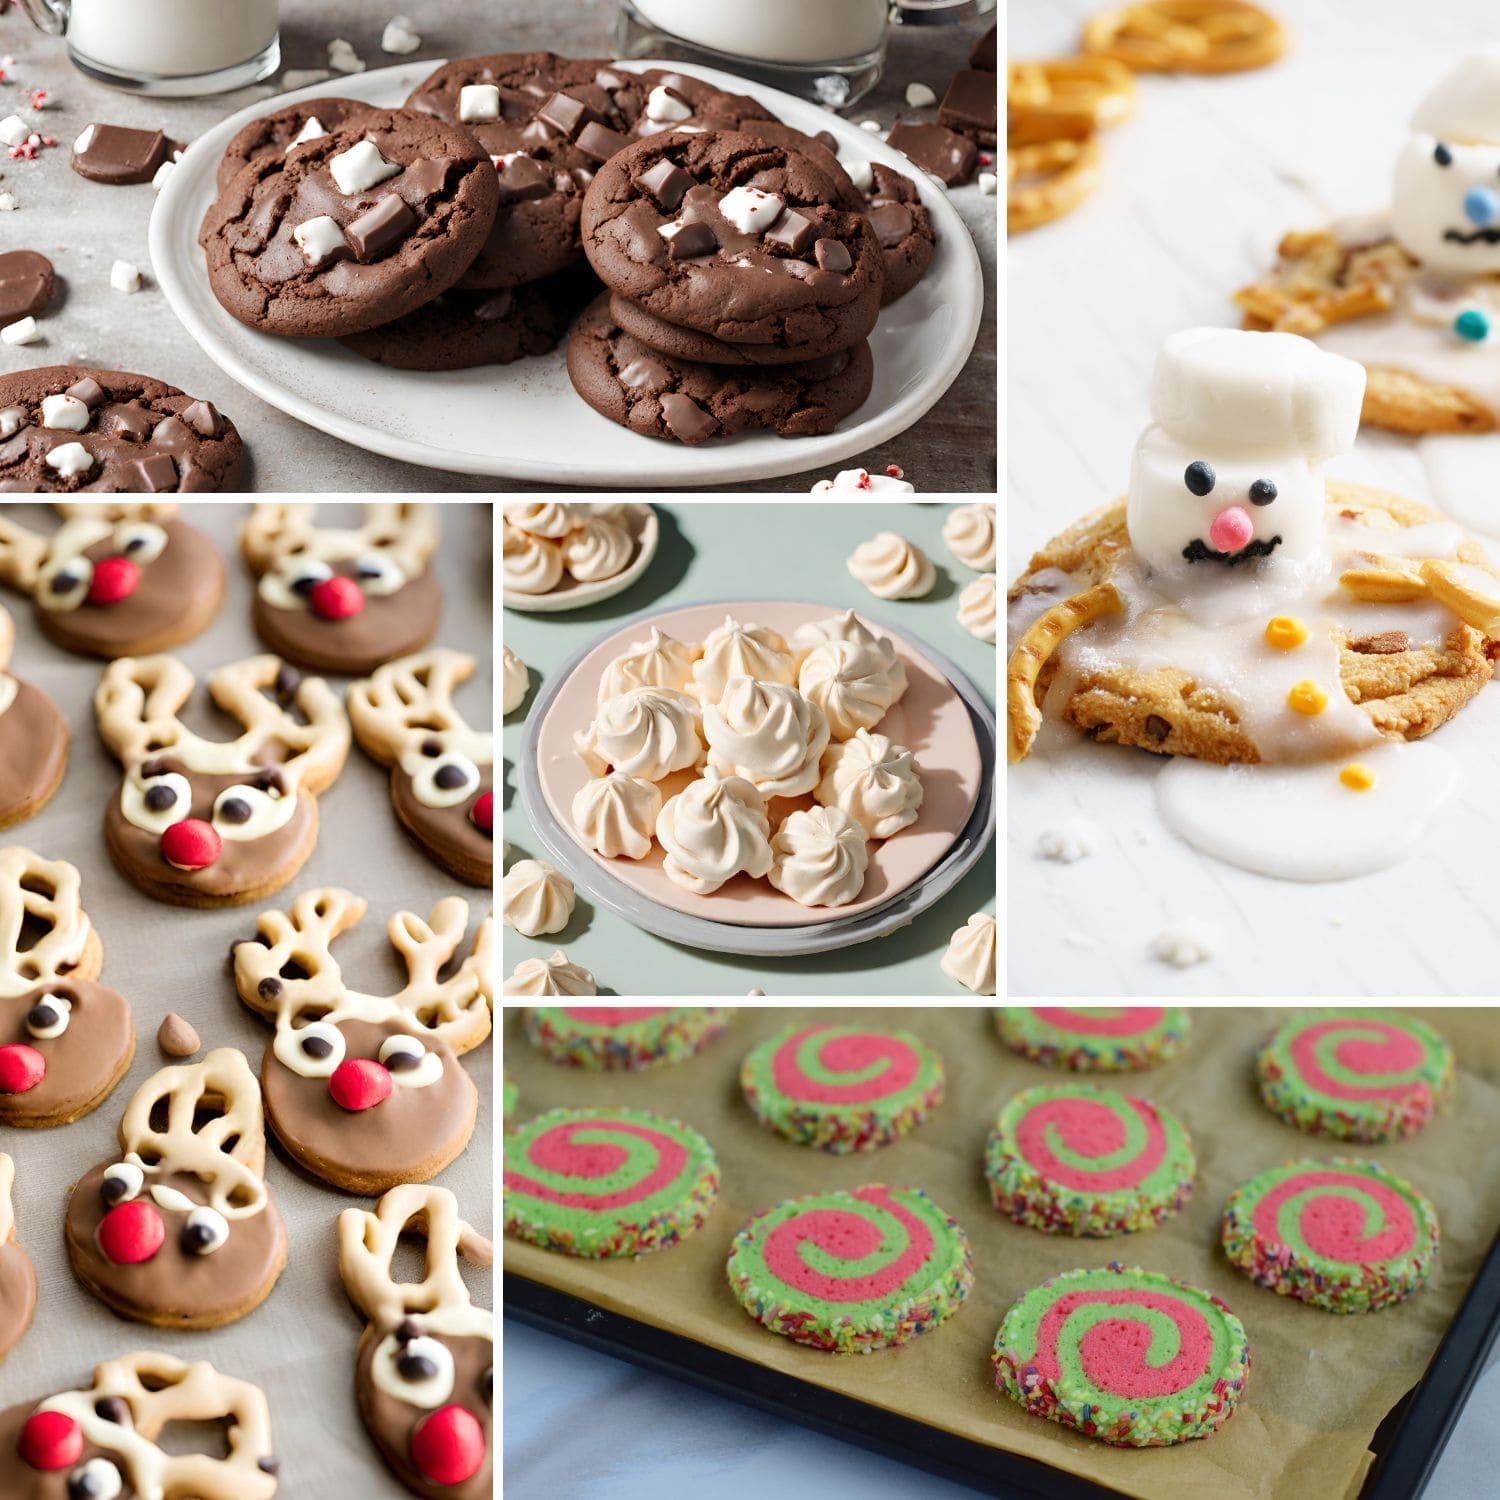 A variety of Christmas cookies decorated for Christmas, including sugar cookies, gingerbread men, peanut butter blossoms, and peppermint pinwheels.